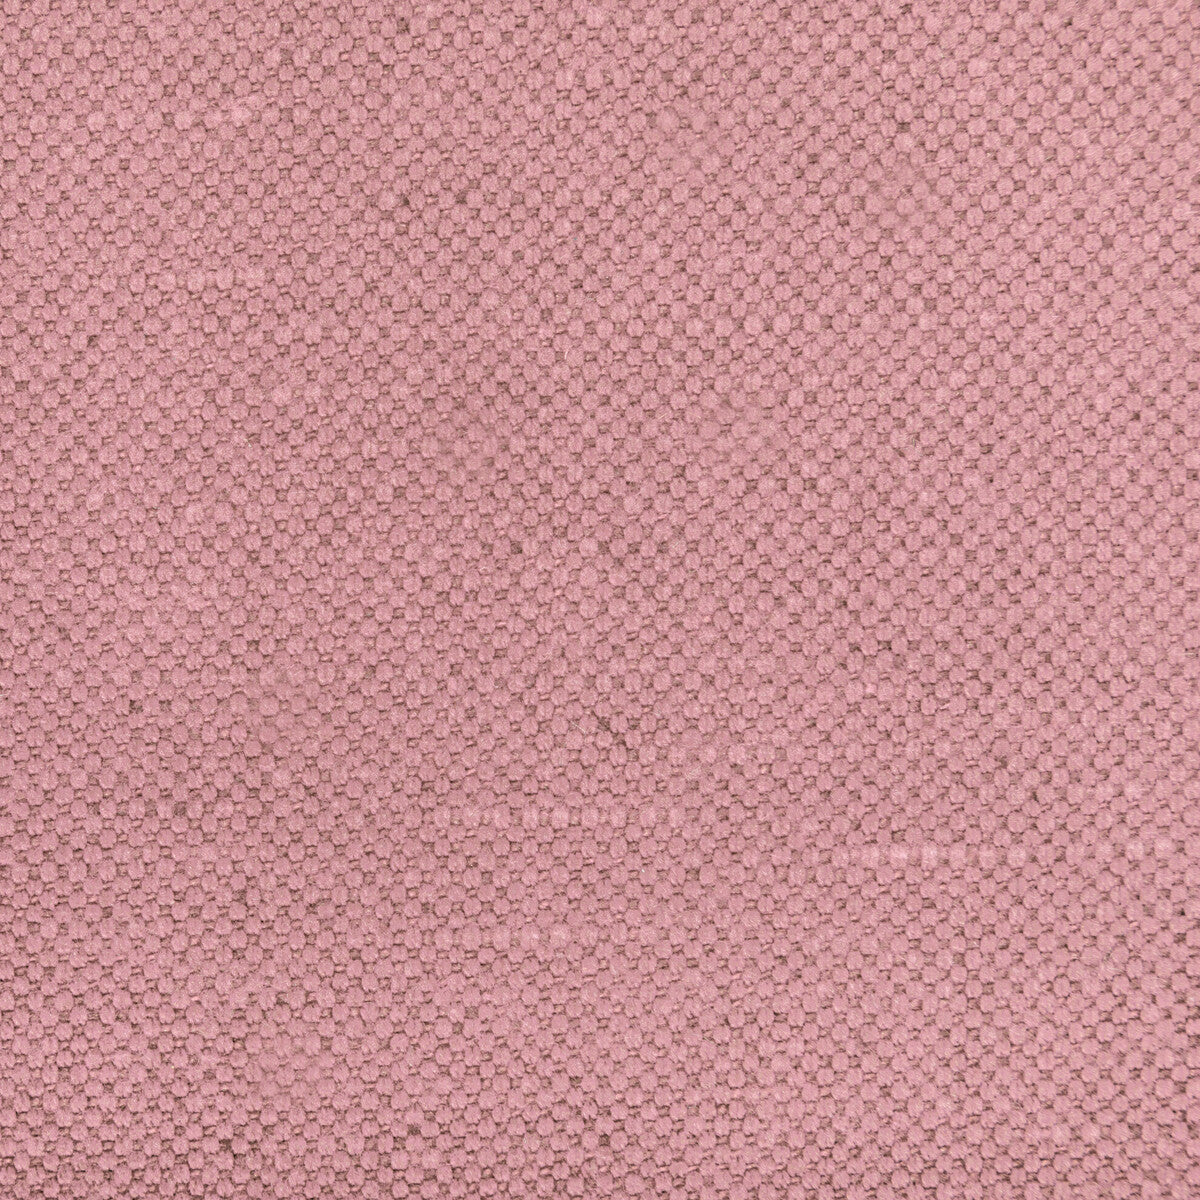 Carson fabric in thistle color - pattern 36282.110.0 - by Kravet Basics